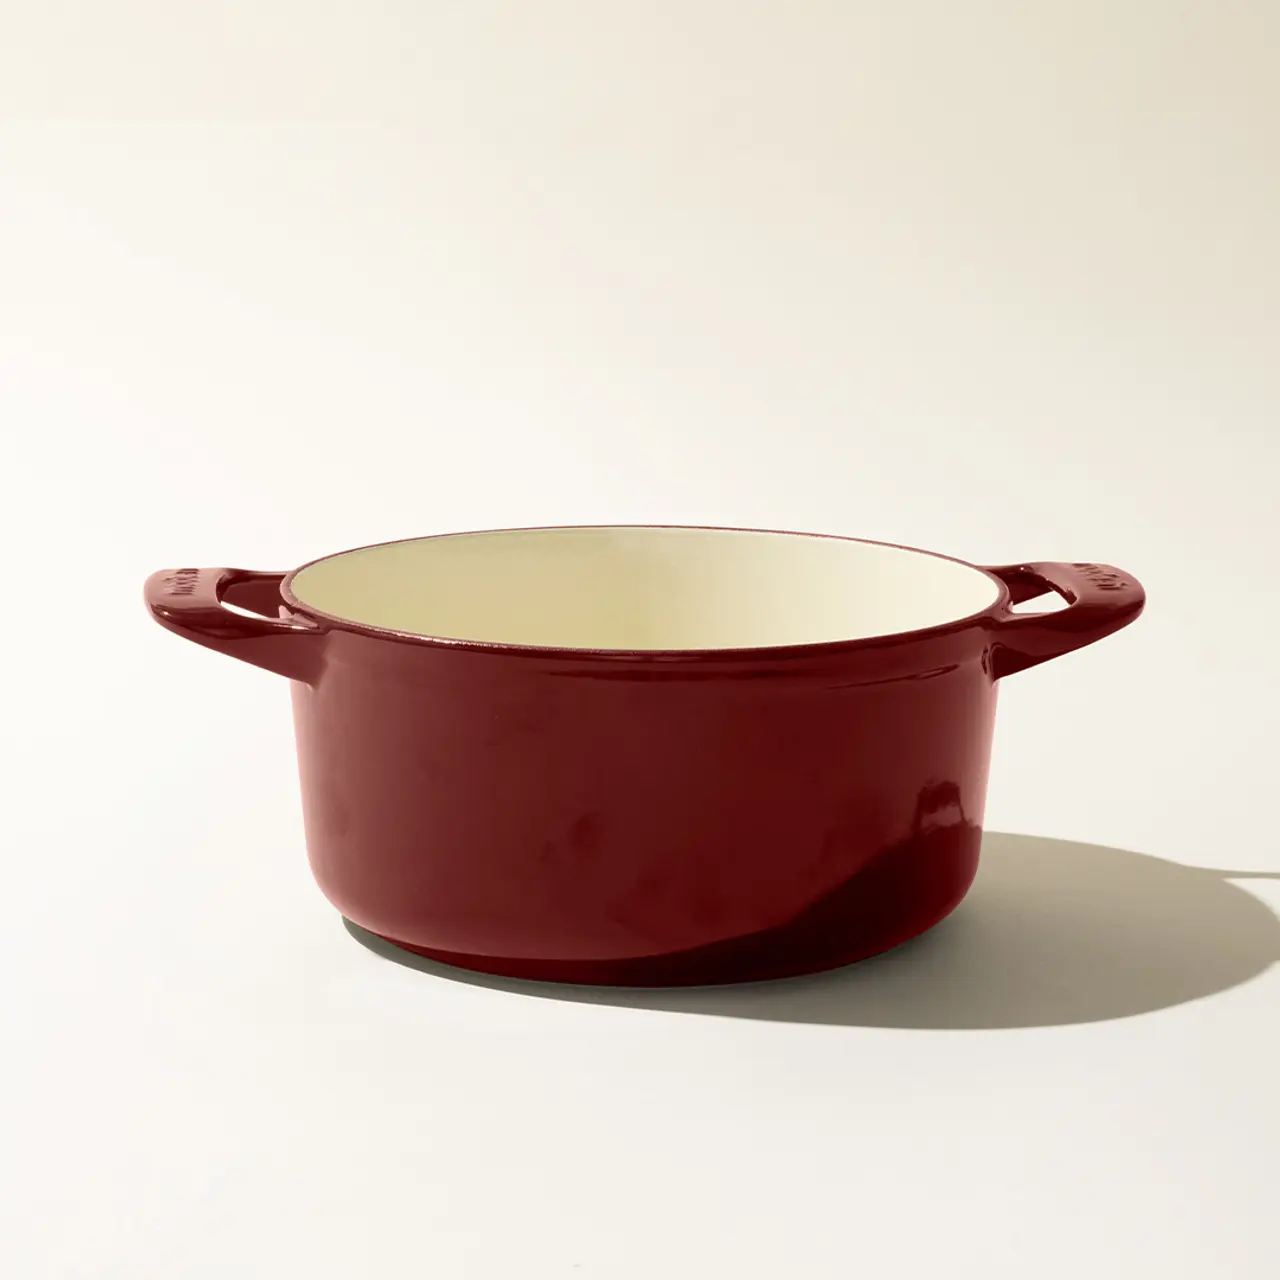 A red enameled cast iron Dutch oven with side handles on a neutral background.